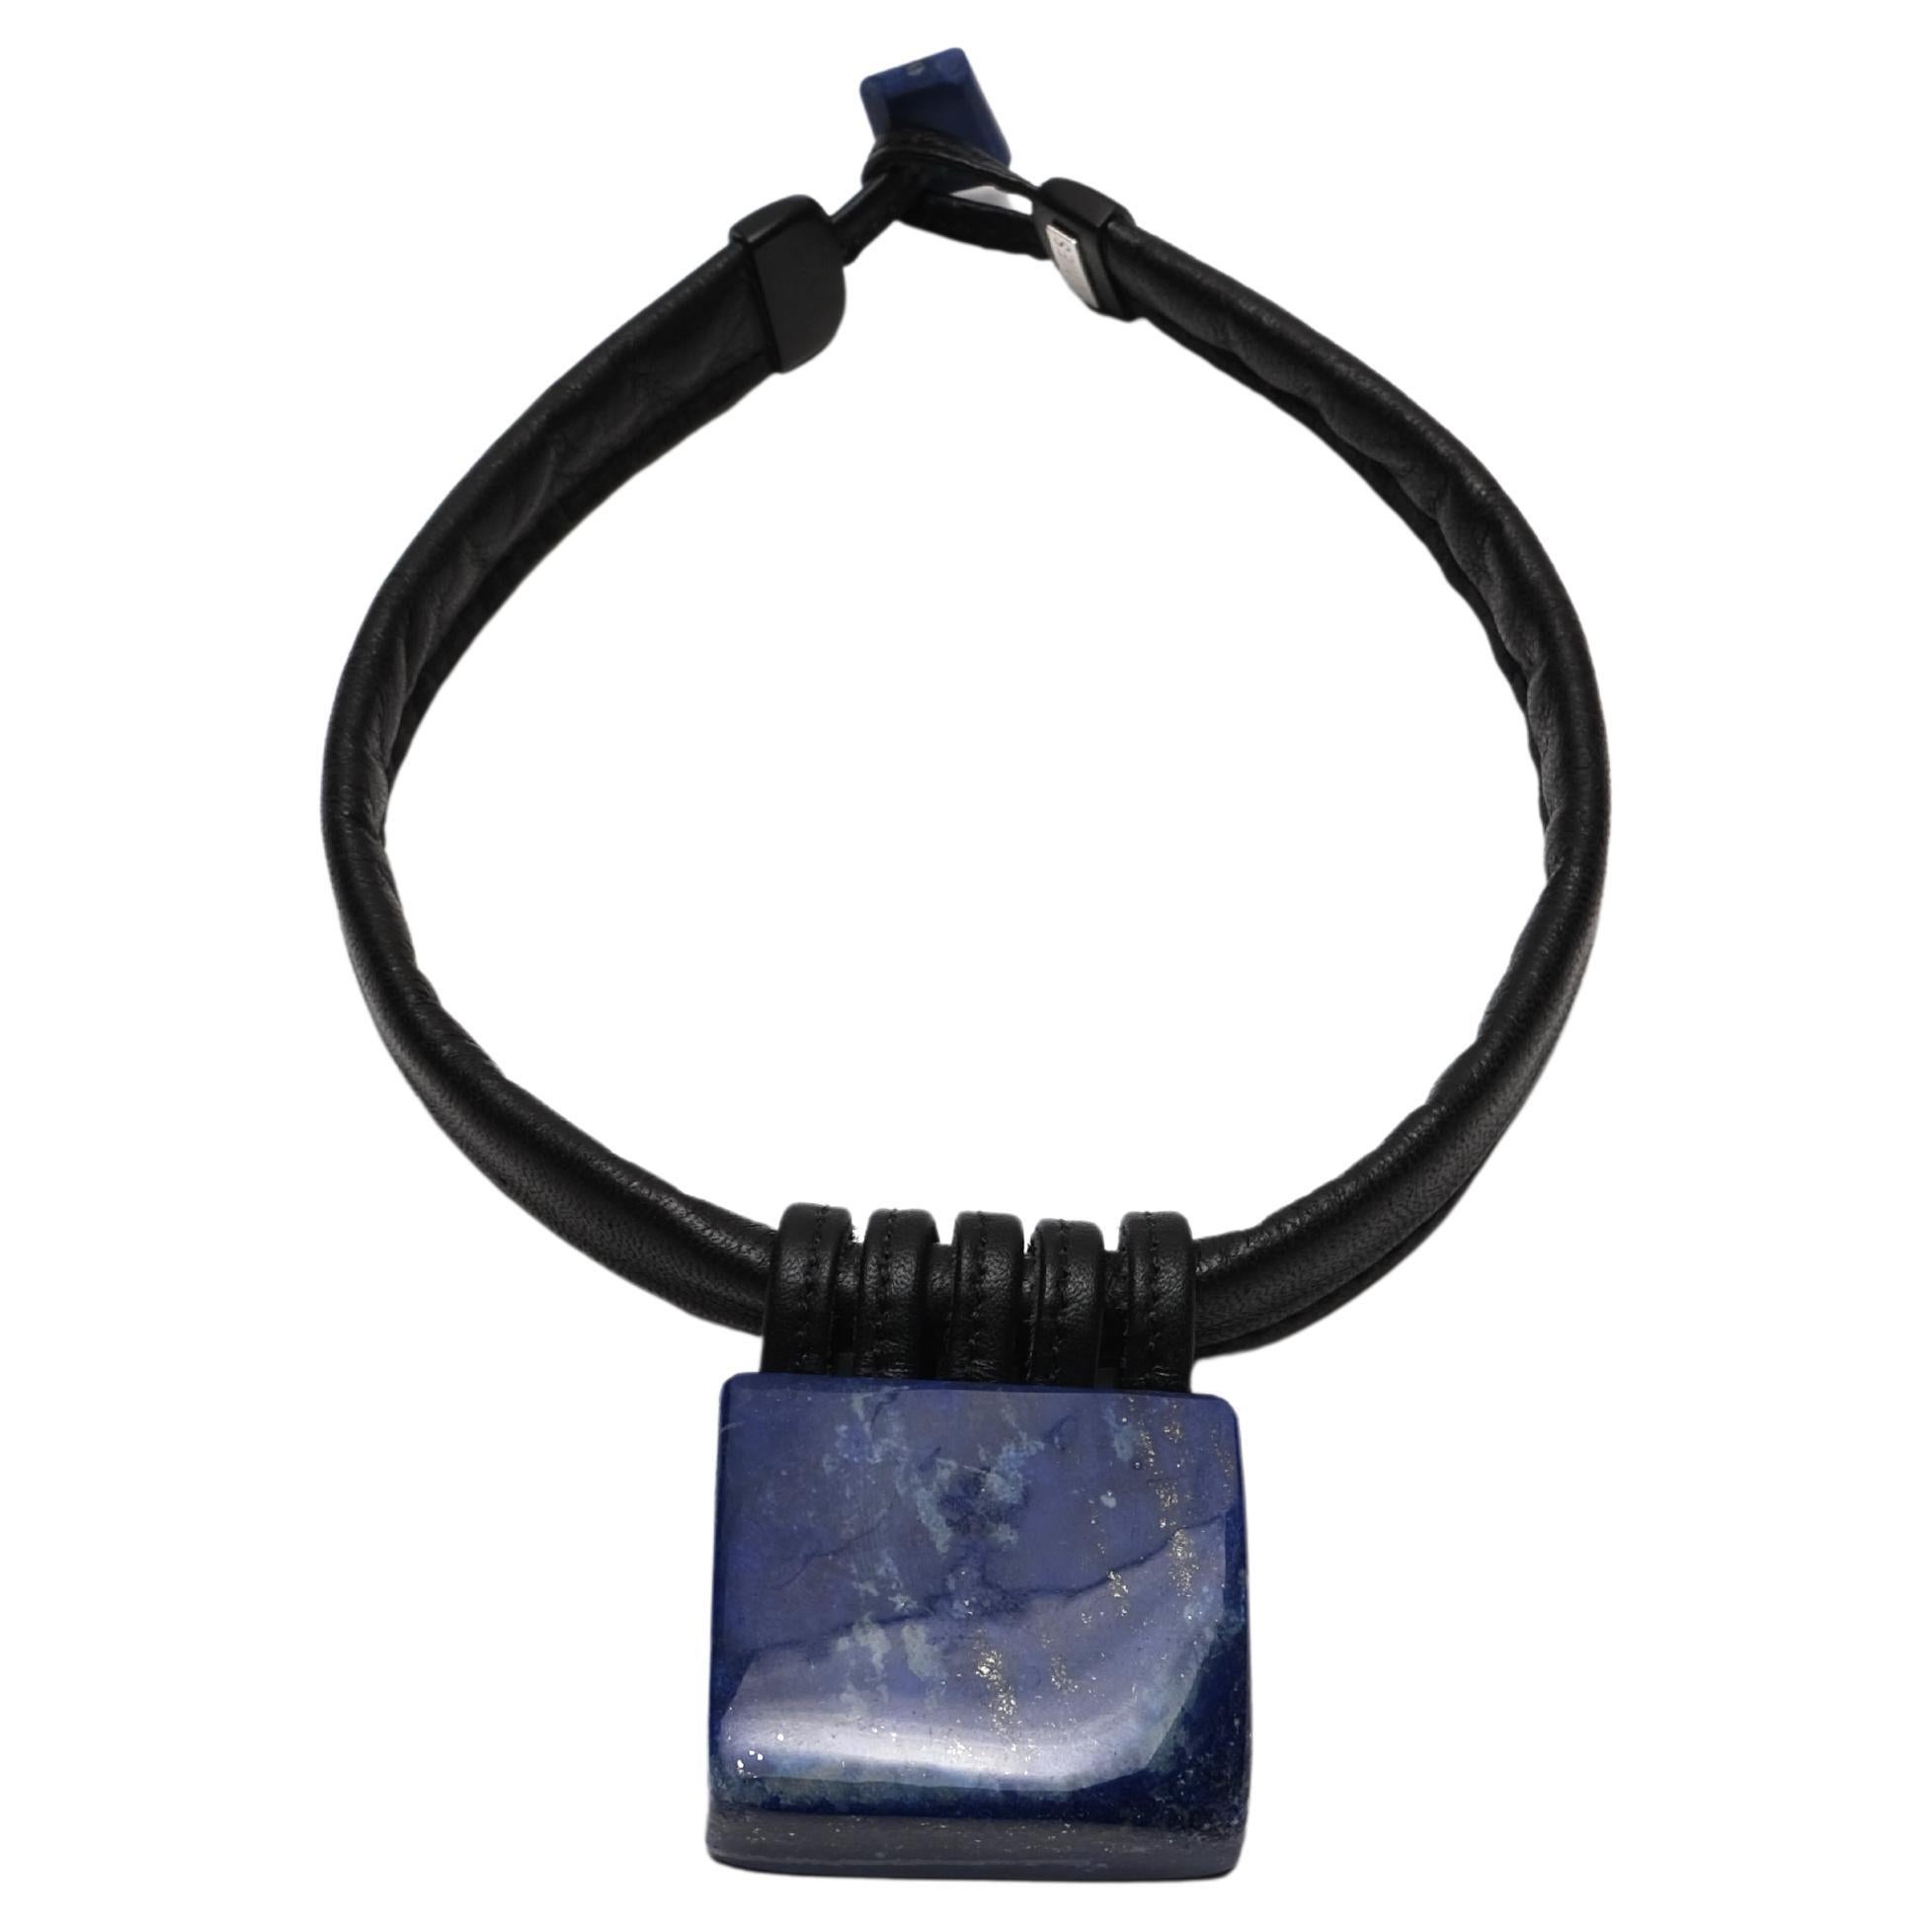 One-of-a-Kind Necklace in Lapis Lazuli and Leather from the Danish Brand Monies For Sale